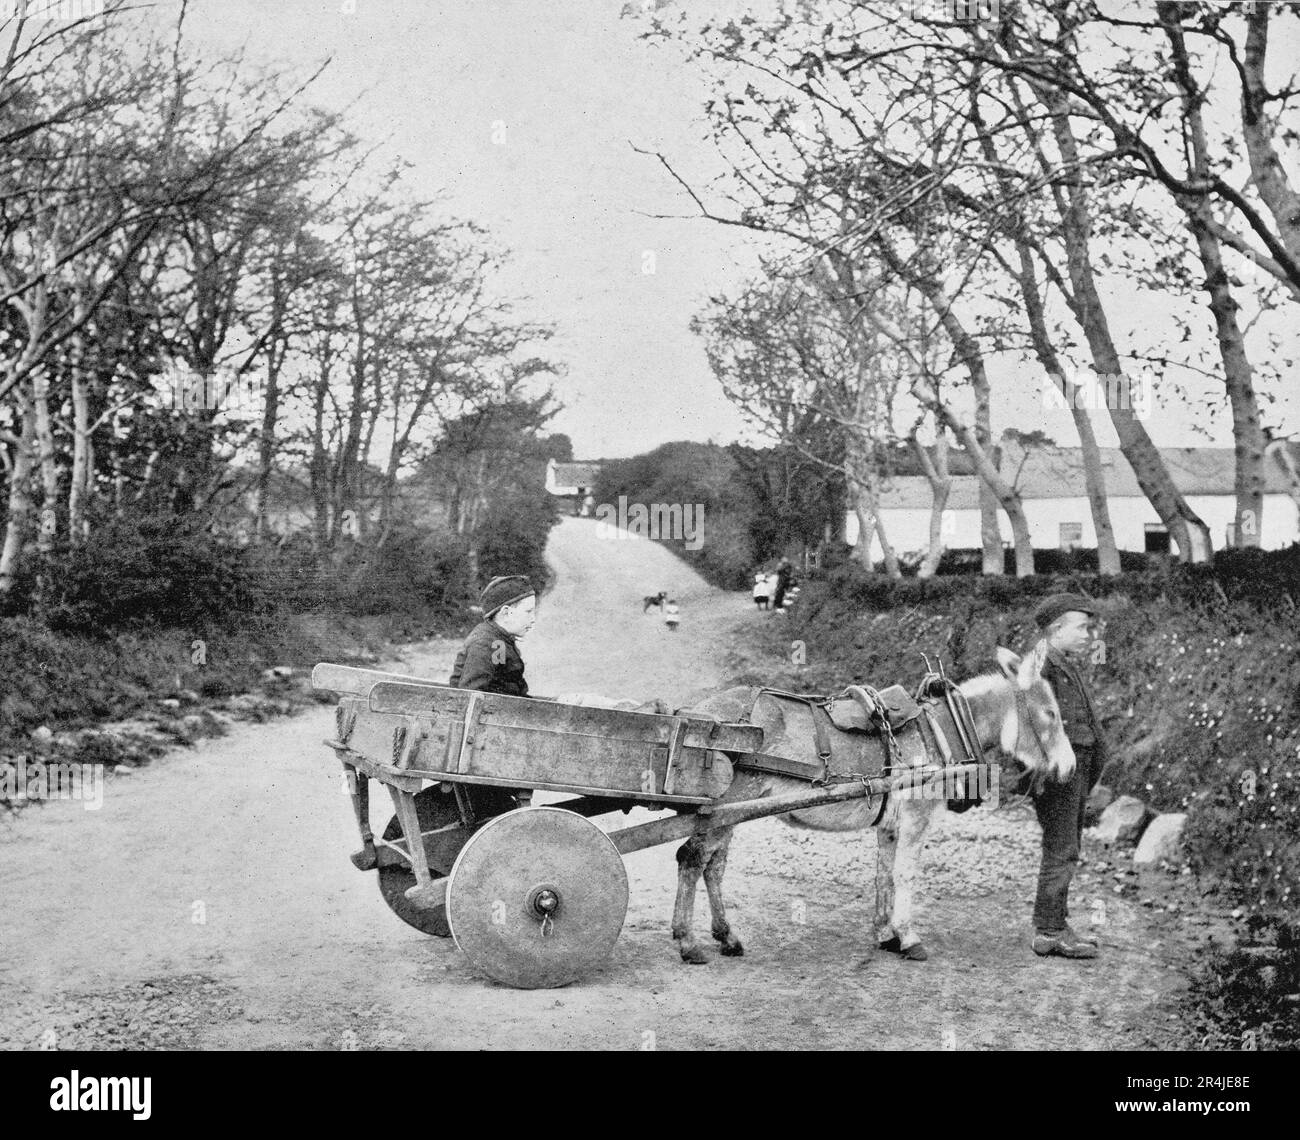 A late 19th century block wheeled cart, a throwback to ancient times appears awkward, but was very strong. Pulled by a donkey and manned by two young lads from Carrickfergus area in County Antrim, Northern Ireland Stock Photo